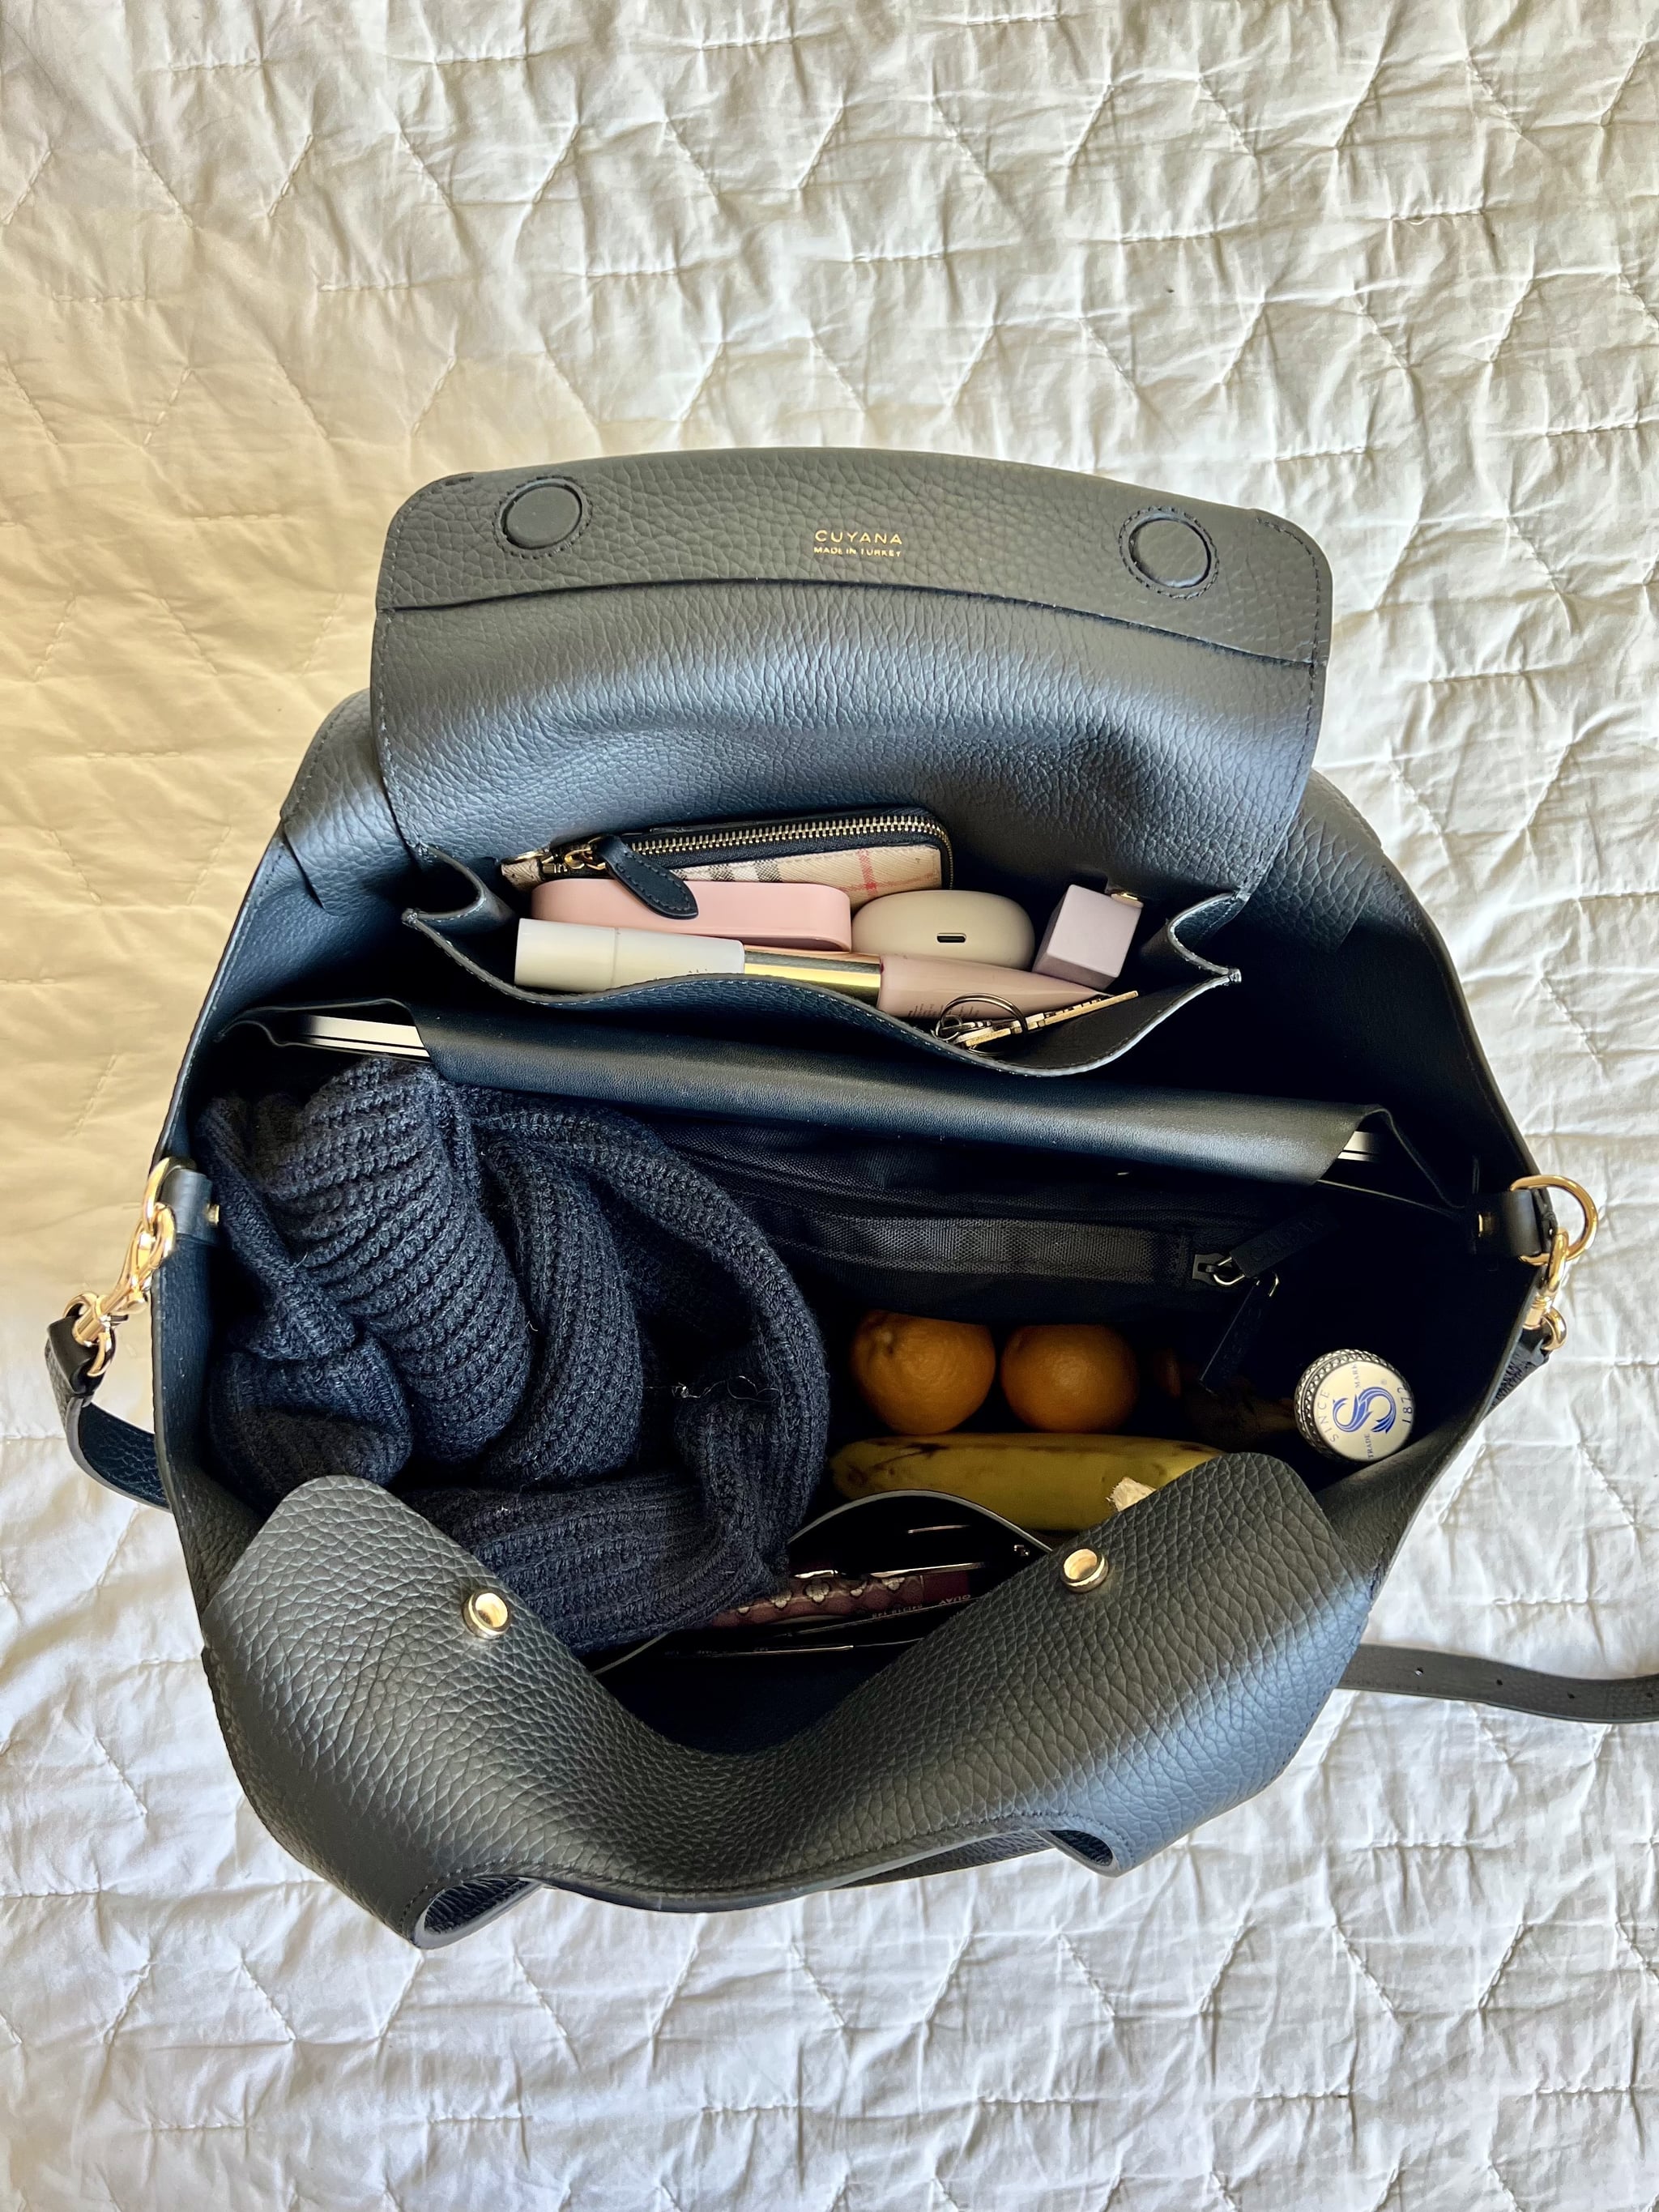 The Cuyana System Tote packed with items like a laptop, tech case, a cardigan, fruits, and more.